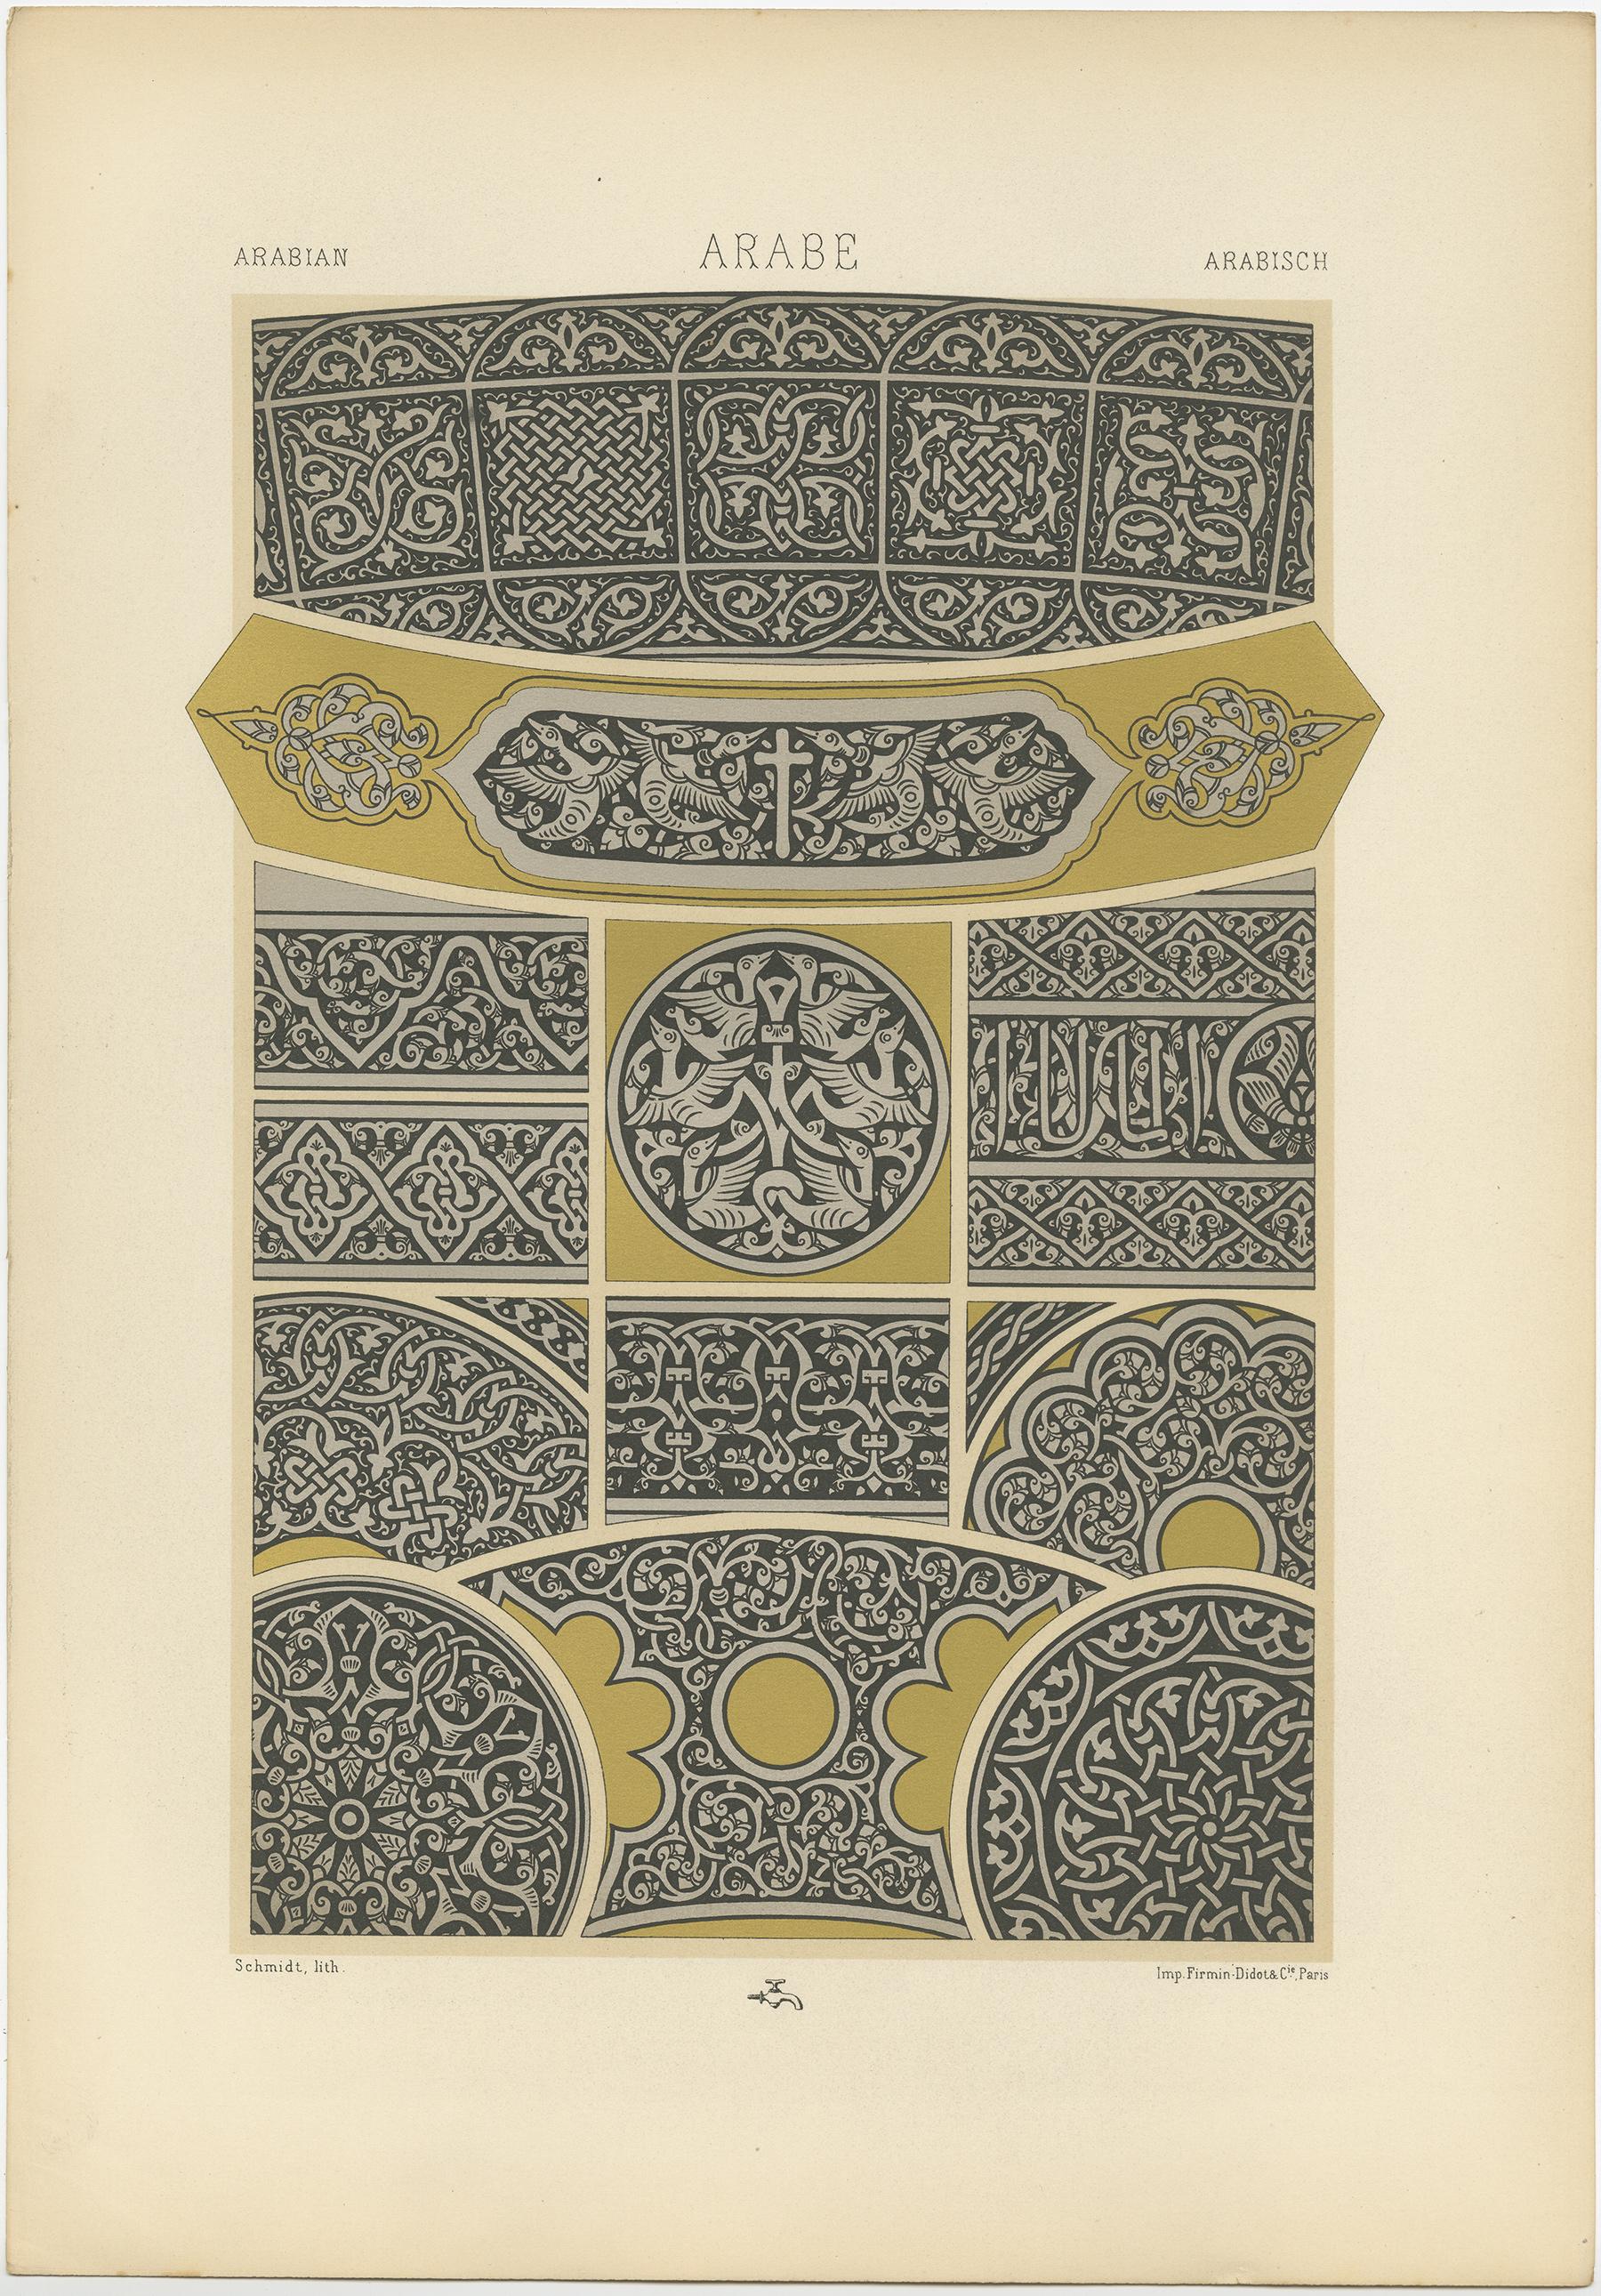 Antique print titled 'Arabian - Arabe - Arabisch'. Chromolithograph of motifs from damascened metalwork ornaments. This print originates from 'l'Ornement Polychrome' by Auguste Racinet. Published circa 1890.